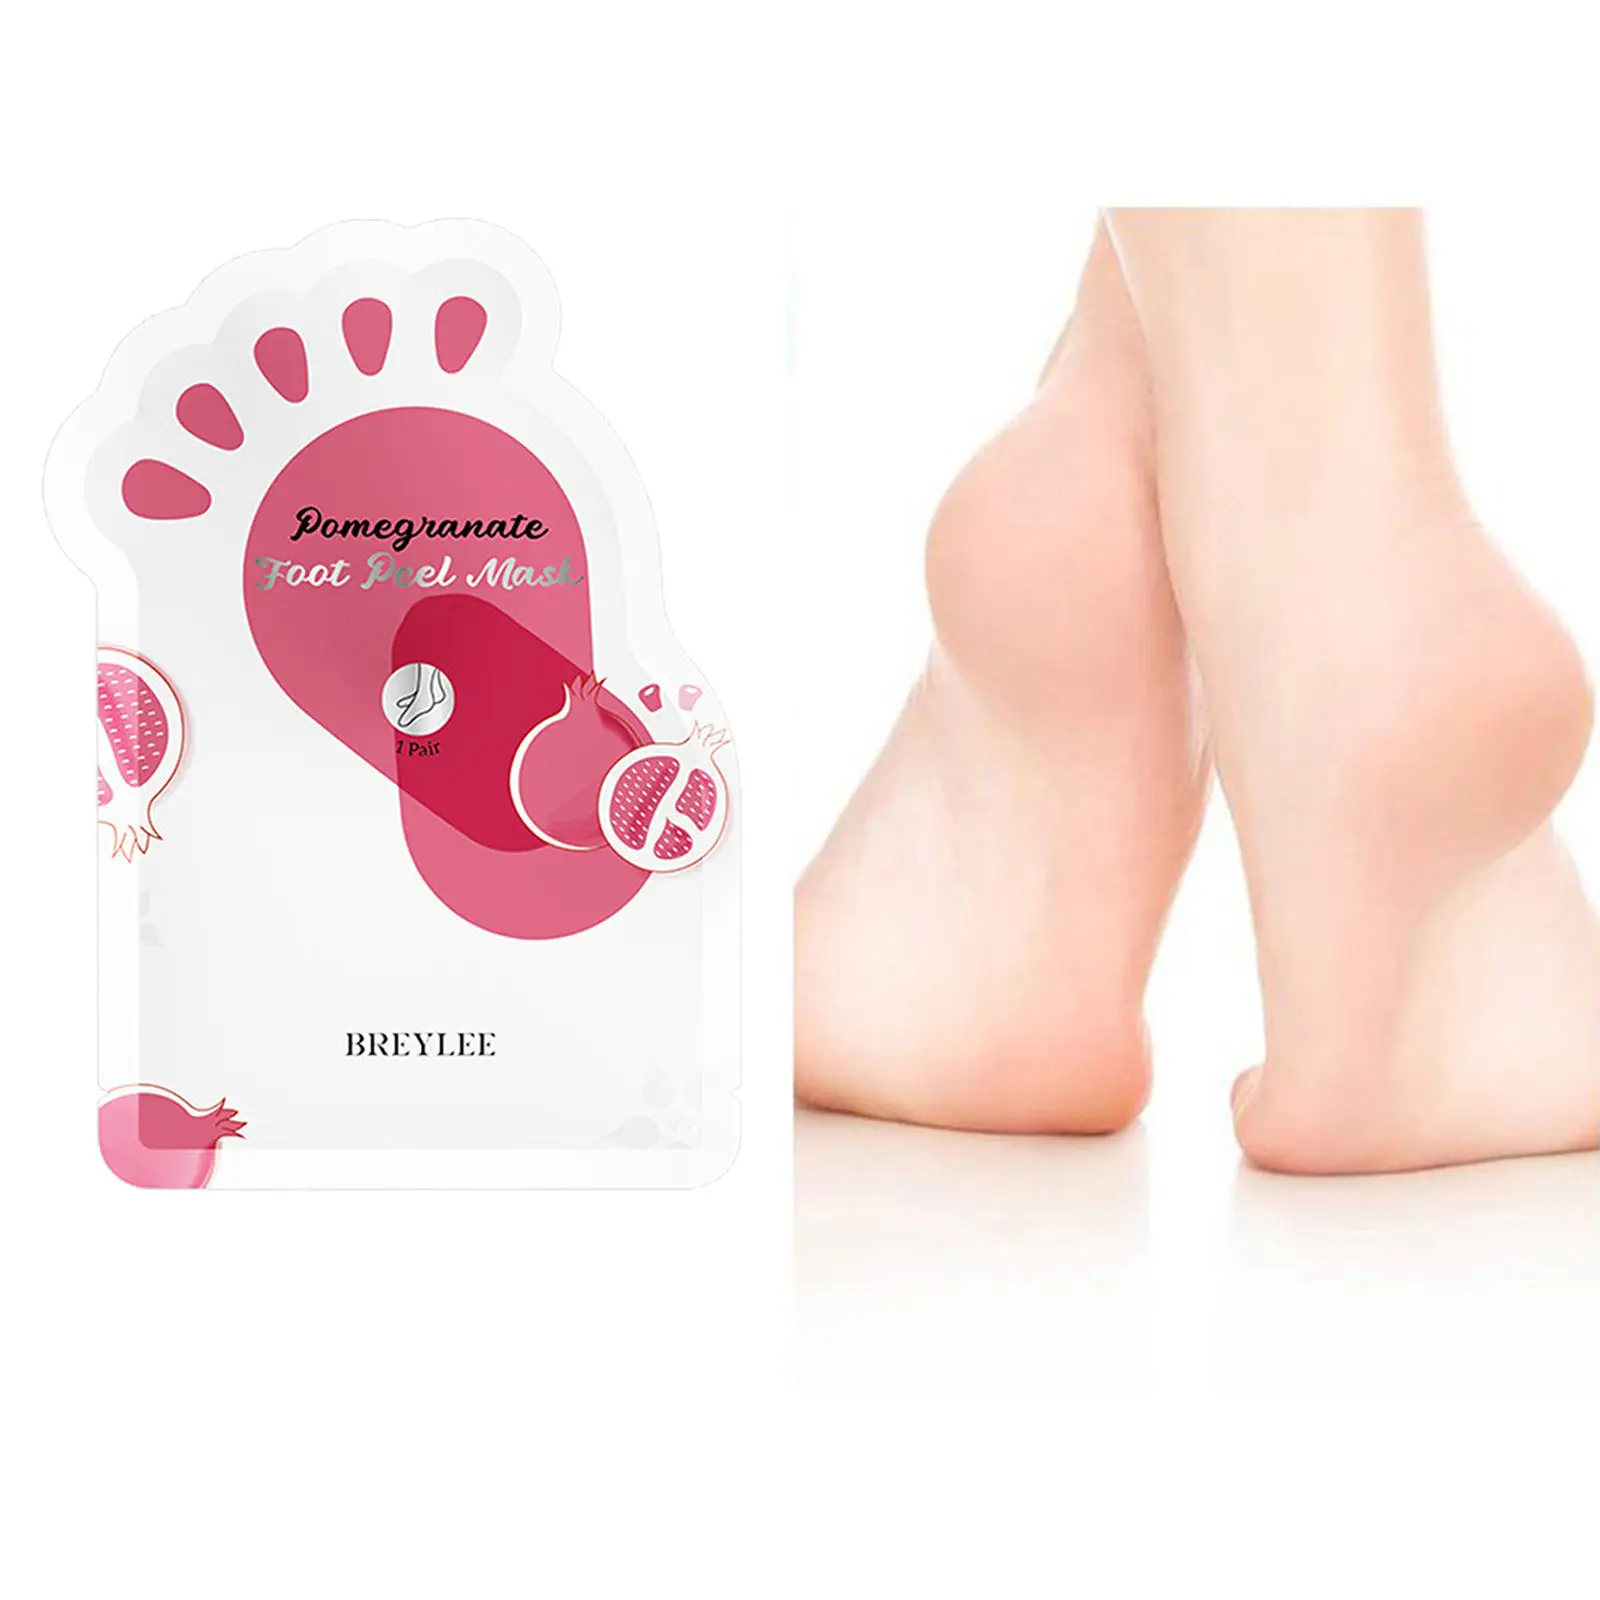 Foot Peel Masks Peeling Remover for Dry Heels Get Soft and Smooth Feet Foot Masks Remove Hard Dead Skin Heels Removal